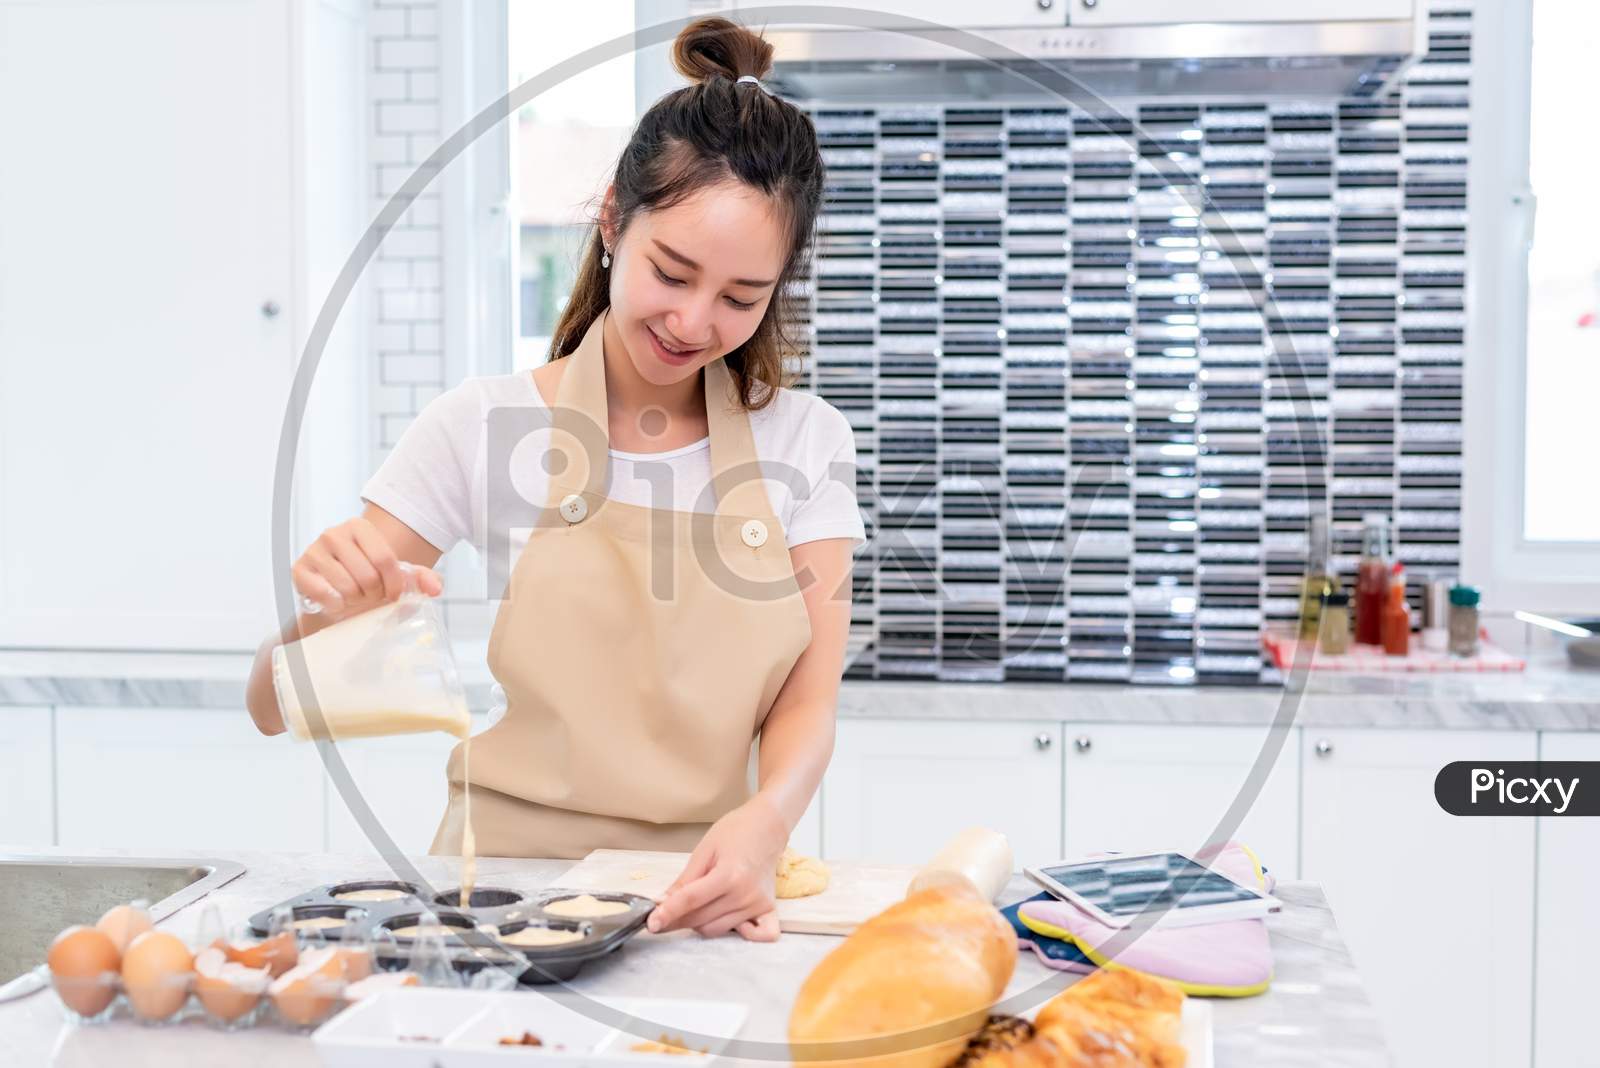 Asian Beauty Woman Cooking And Baking Cookies In Kitchen Room On Table. Holiday And Happiness Concept. People And Lifestyles Concept. Family And Dinner Party Theme. Girl Enjoy Making Cake With Apron